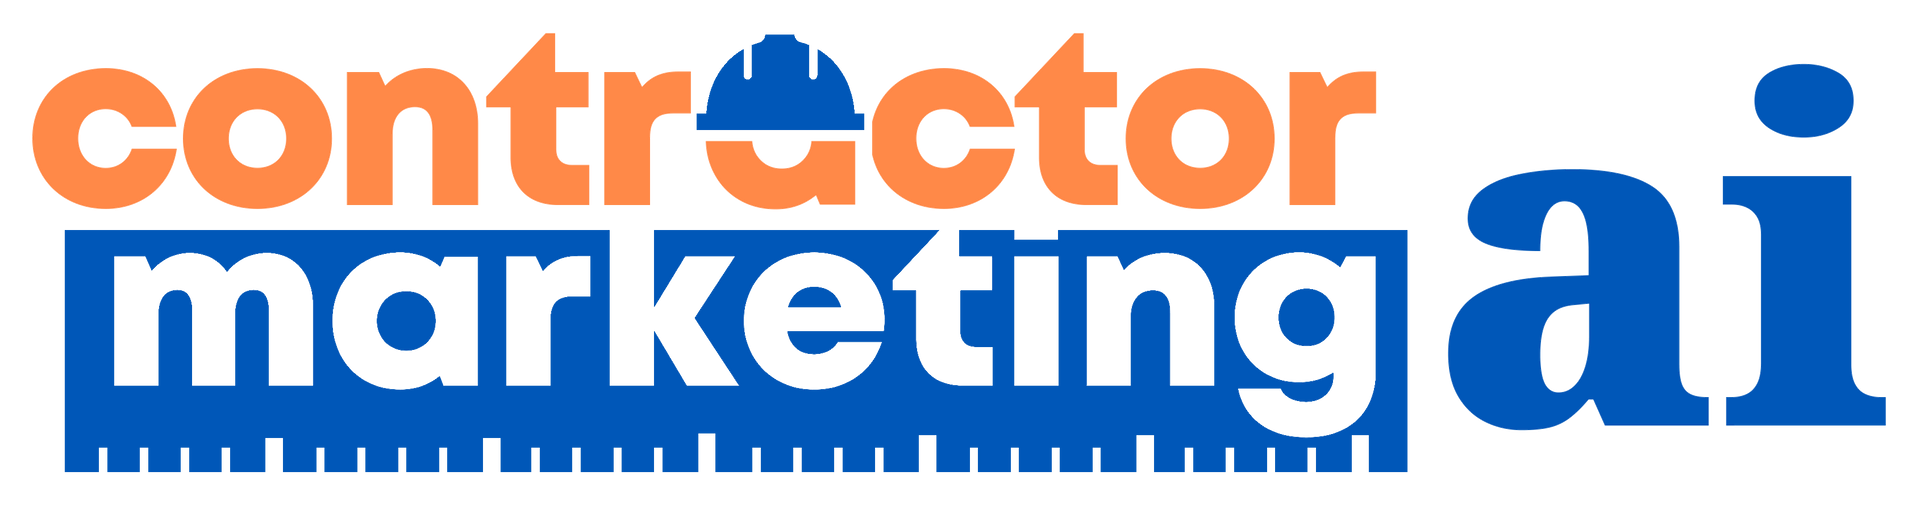 A blue and orange logo for contractor marketing ai